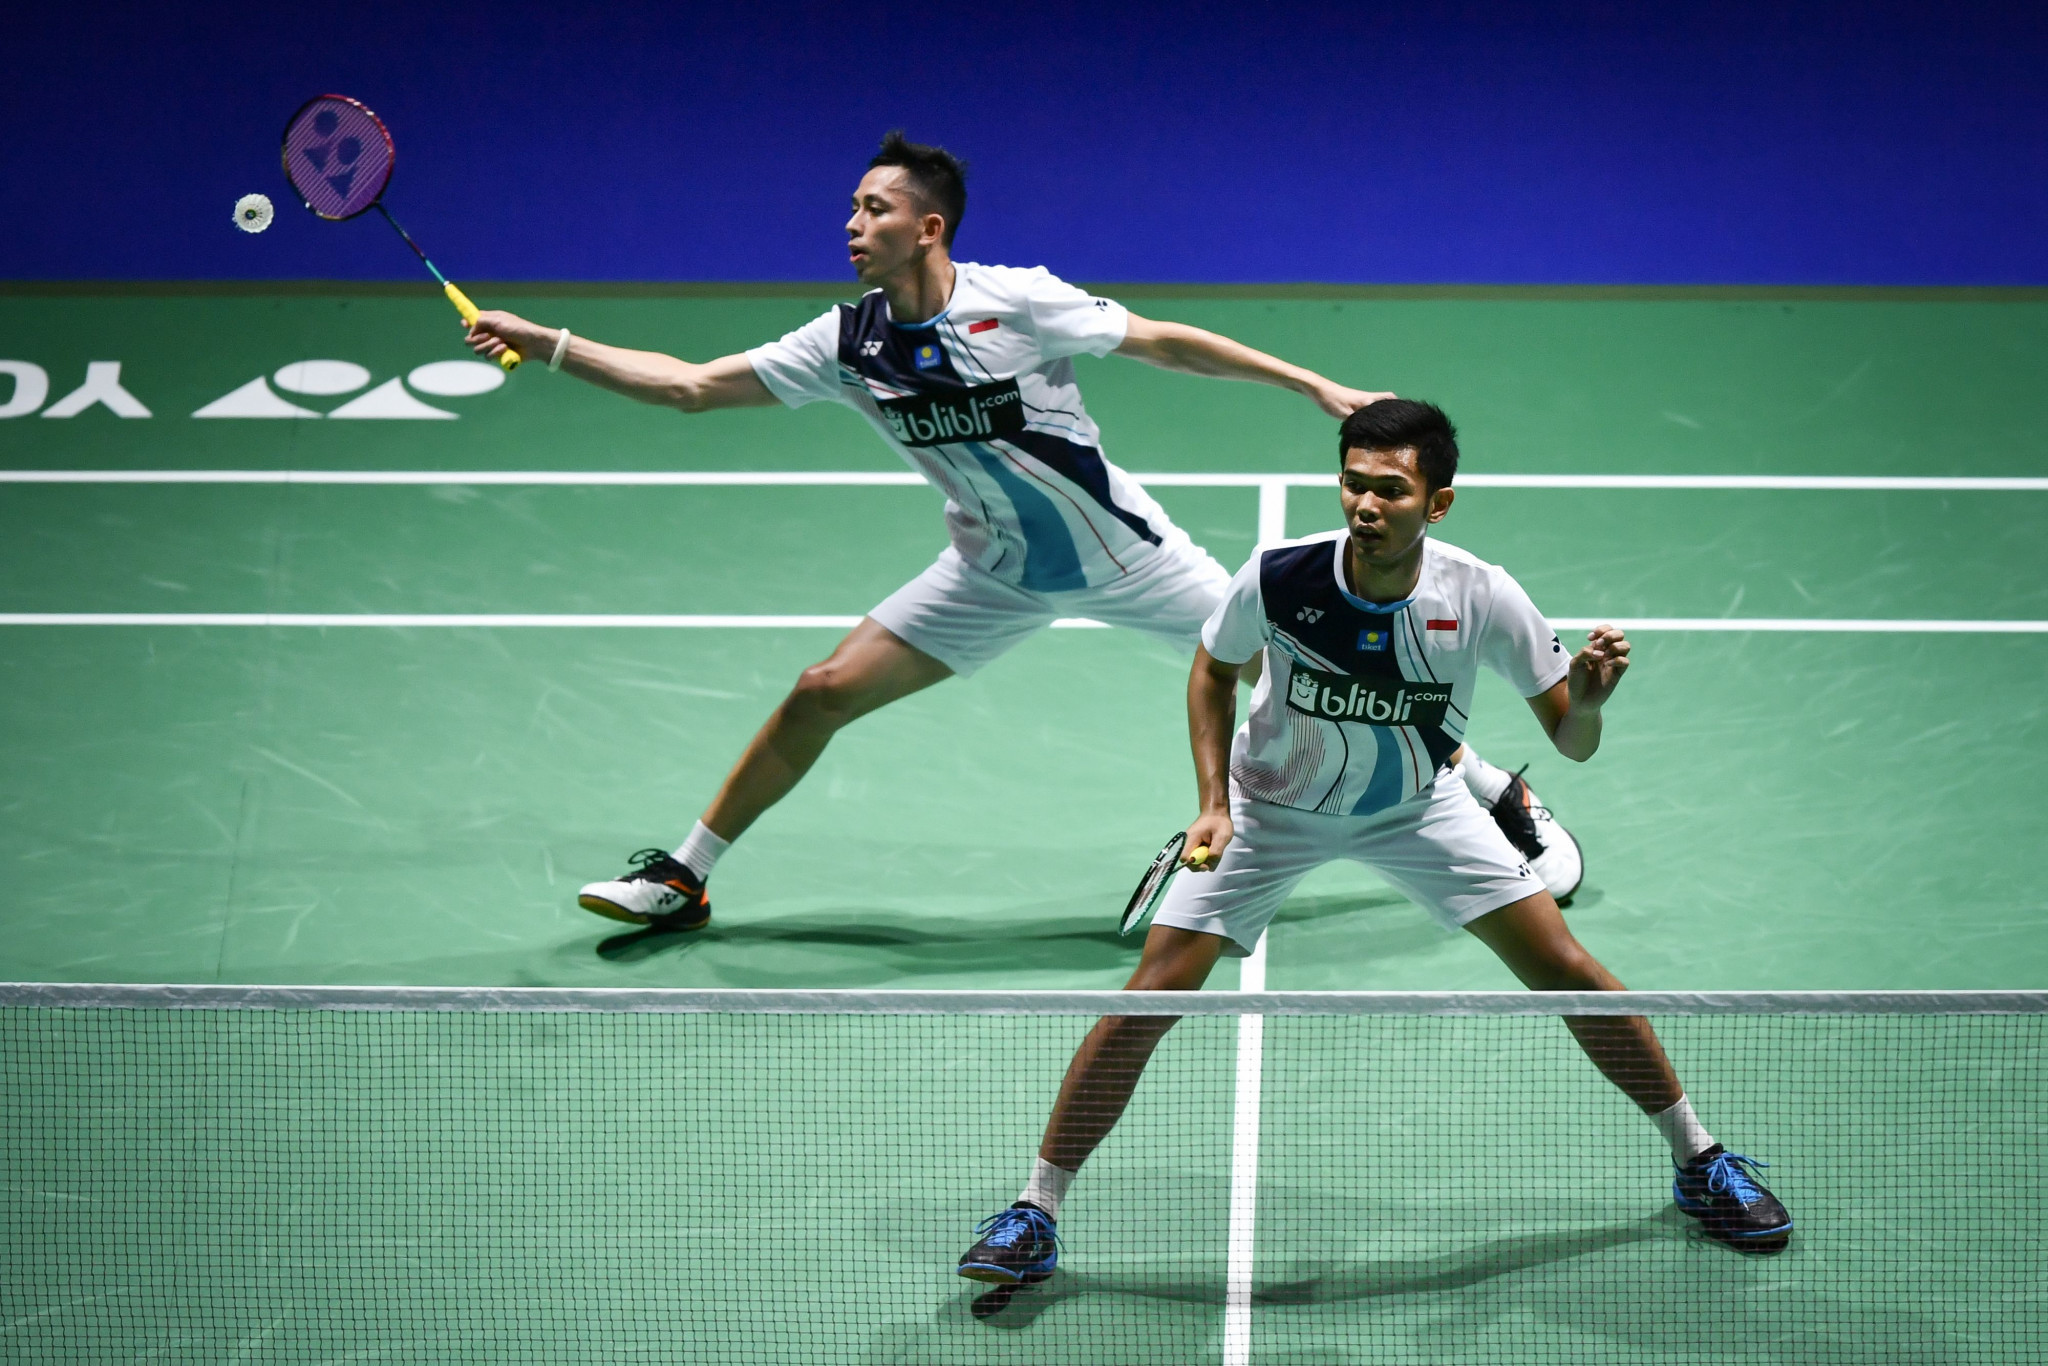 Mohammad Ahsan and Fajar Alfian sealed the men's title for Indonesia ©Getty Images